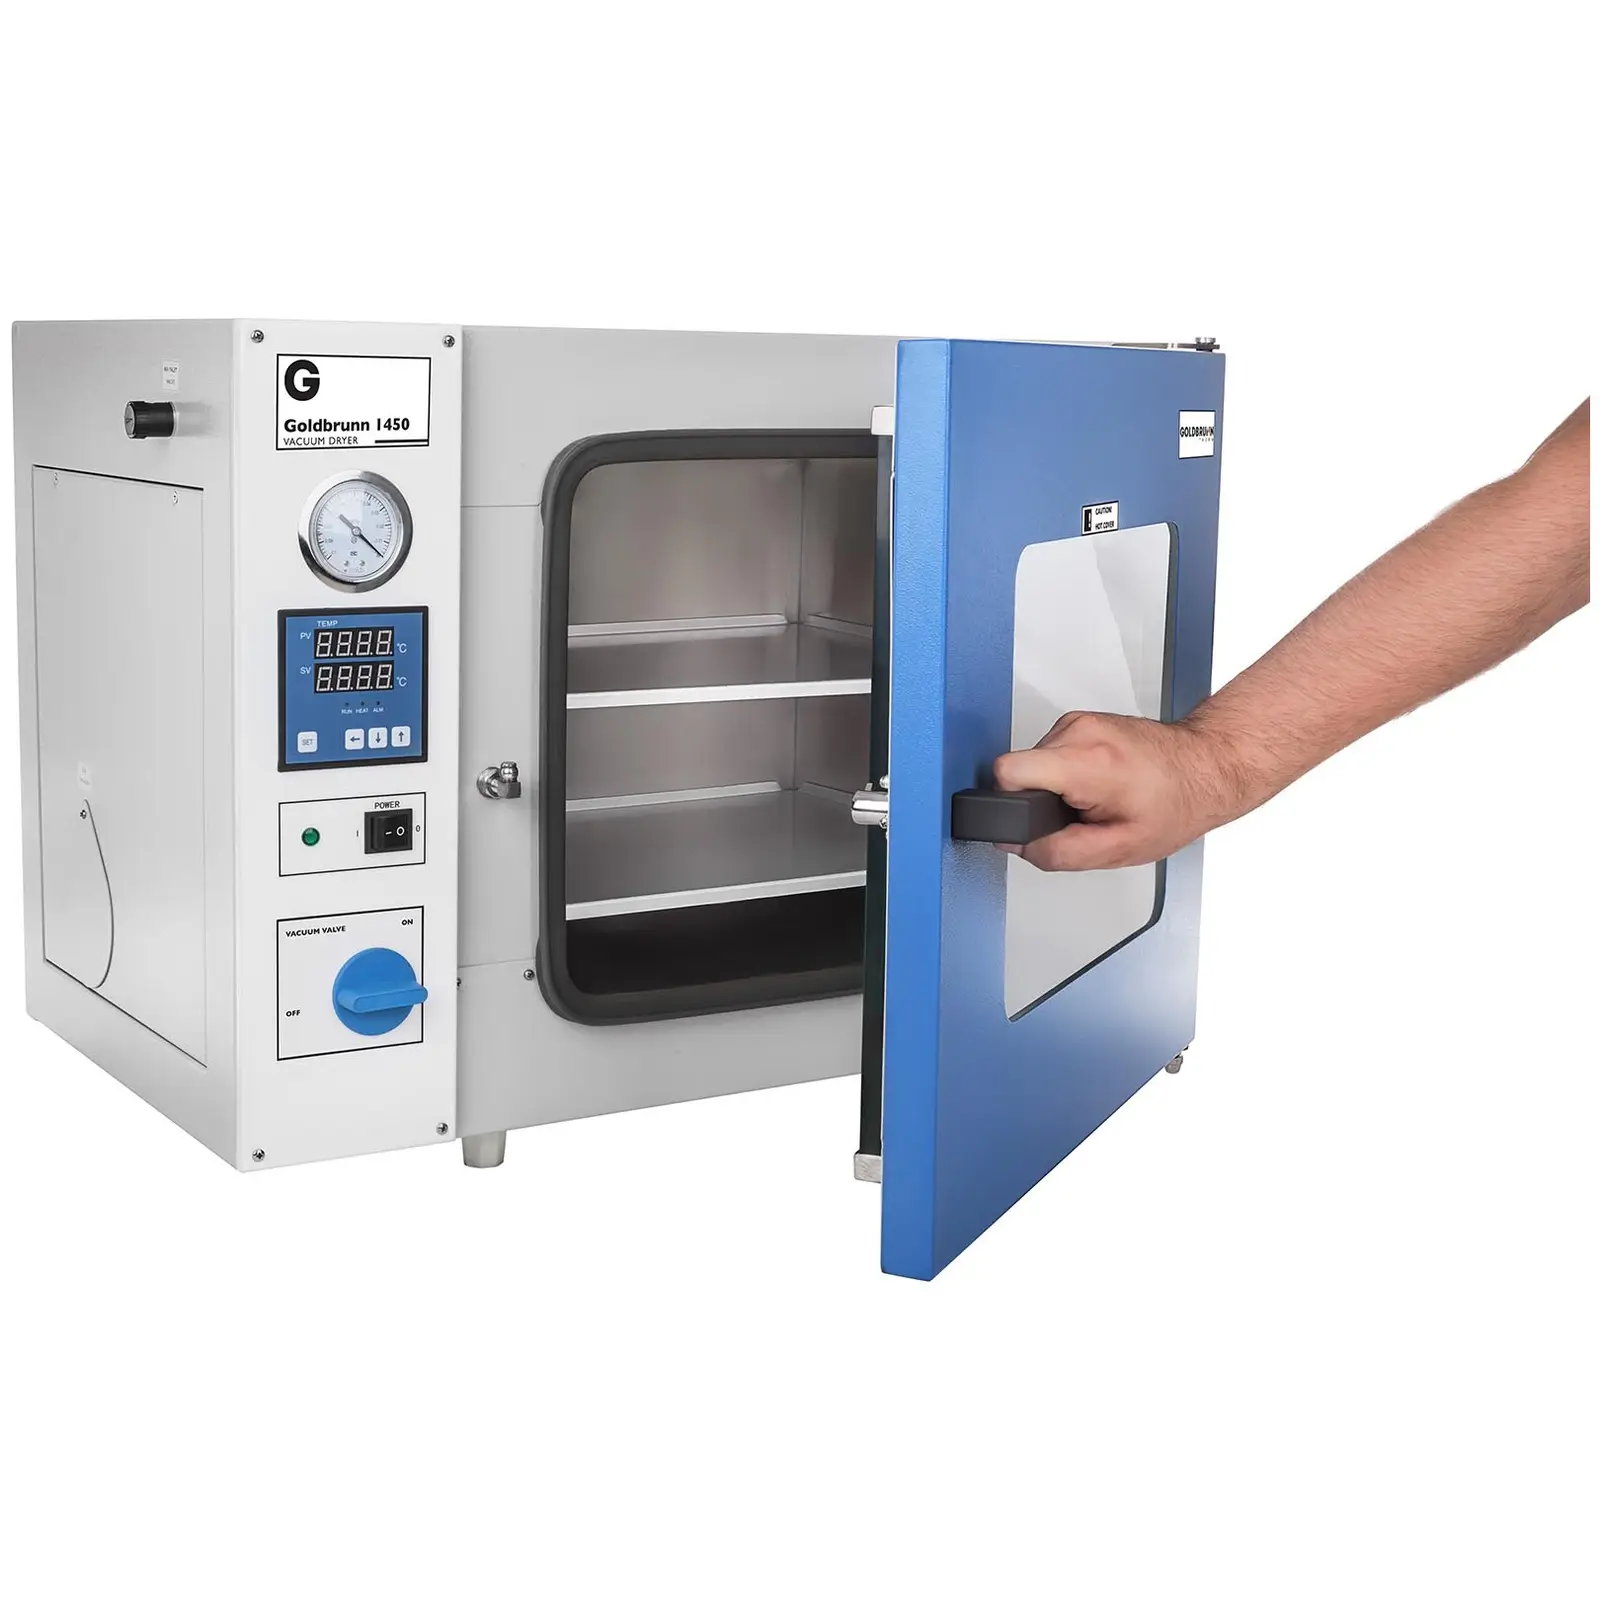 Factory second Vacuum Drying Oven - 1,450 watts